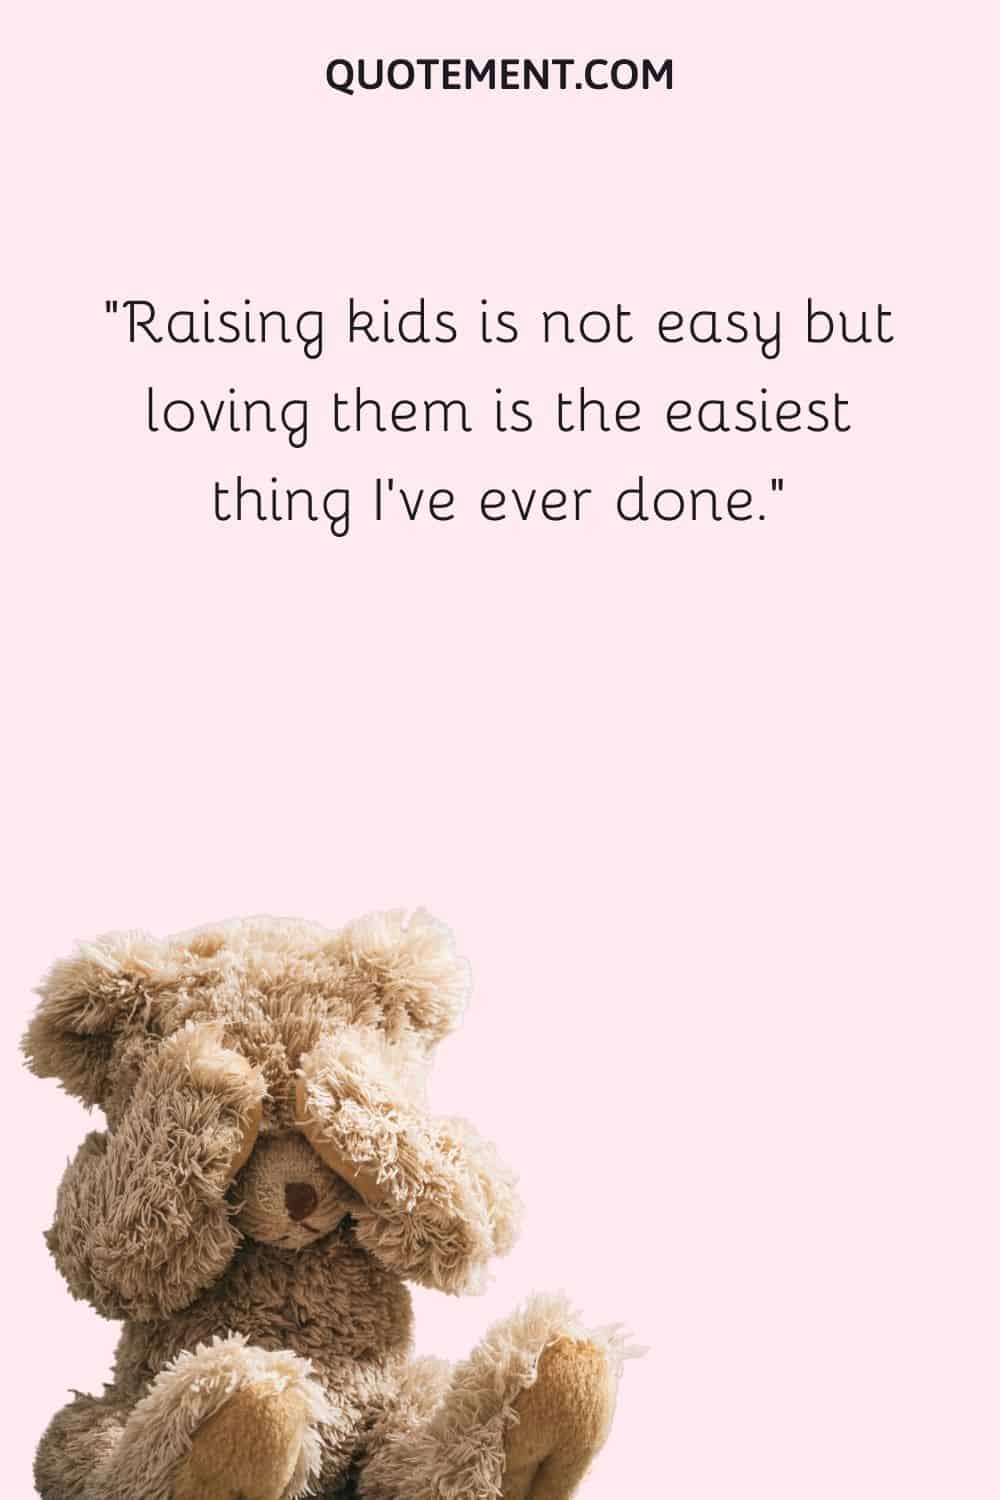 Raising kids is not easy but loving them is the easiest thing I've ever done.